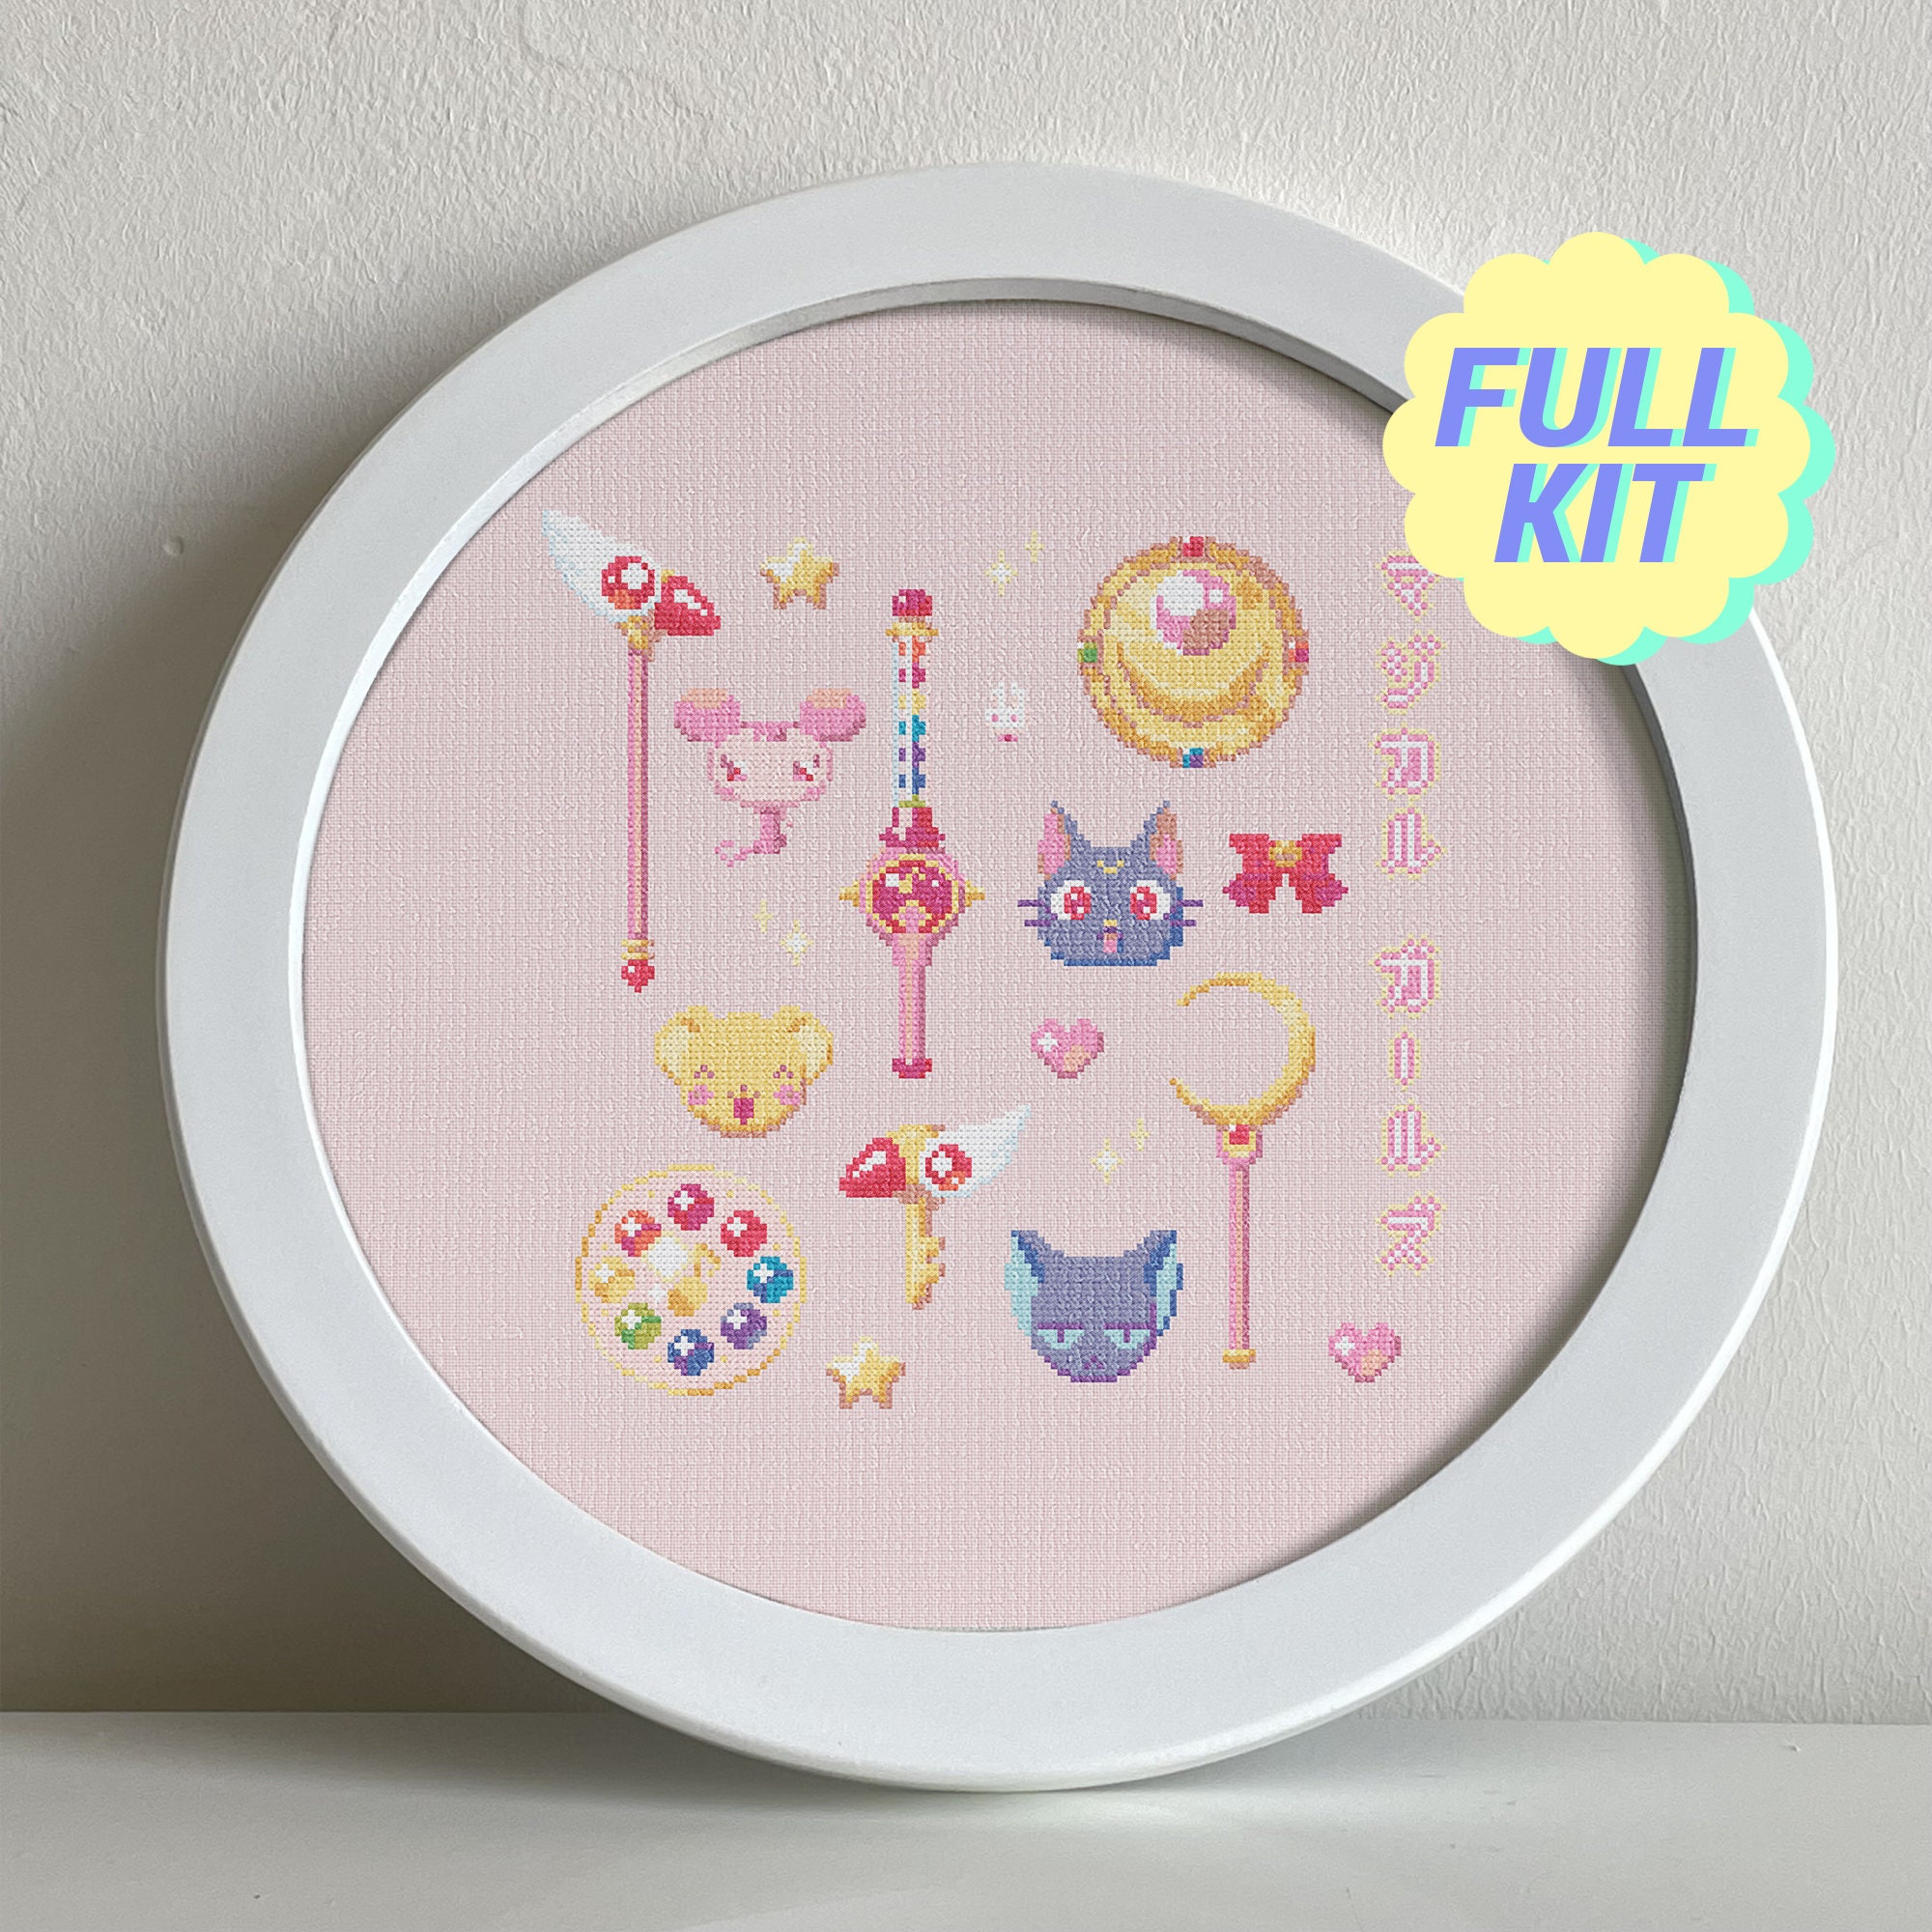 Baby Girl With Toys Cross Stitch Pattern Mom Cross Stitch Toy Bear Cross Stitch  Girl With Teddy Cross Stitch Gift for Girl Baby Cross Stitch 